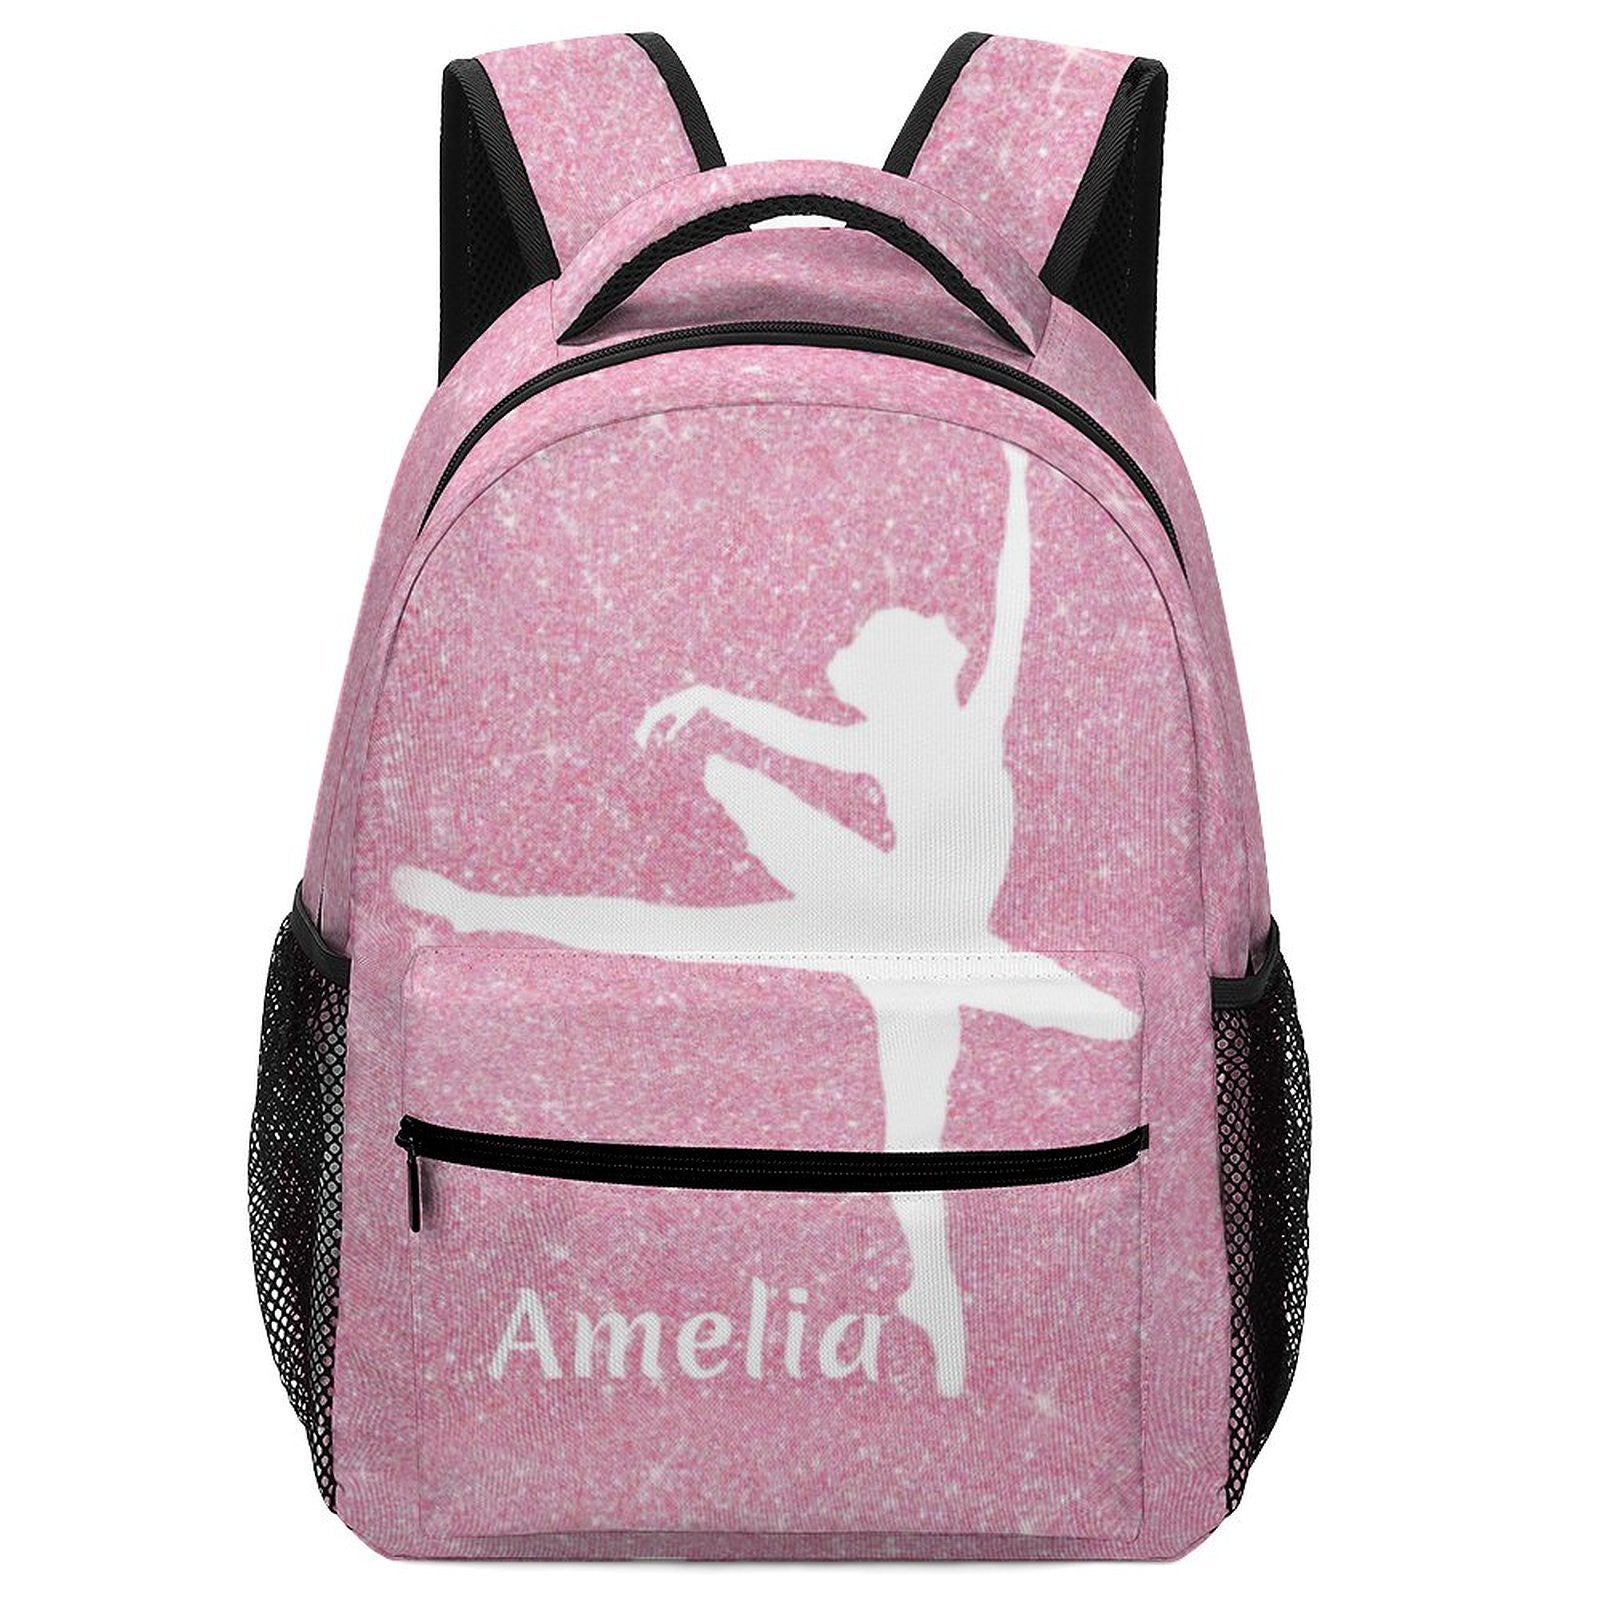 Custom Backpack with Name, Personalized Backpack with Name Text, Customized Daypack Schoolbag for Kids Students Bookbag, Back to School Gifts